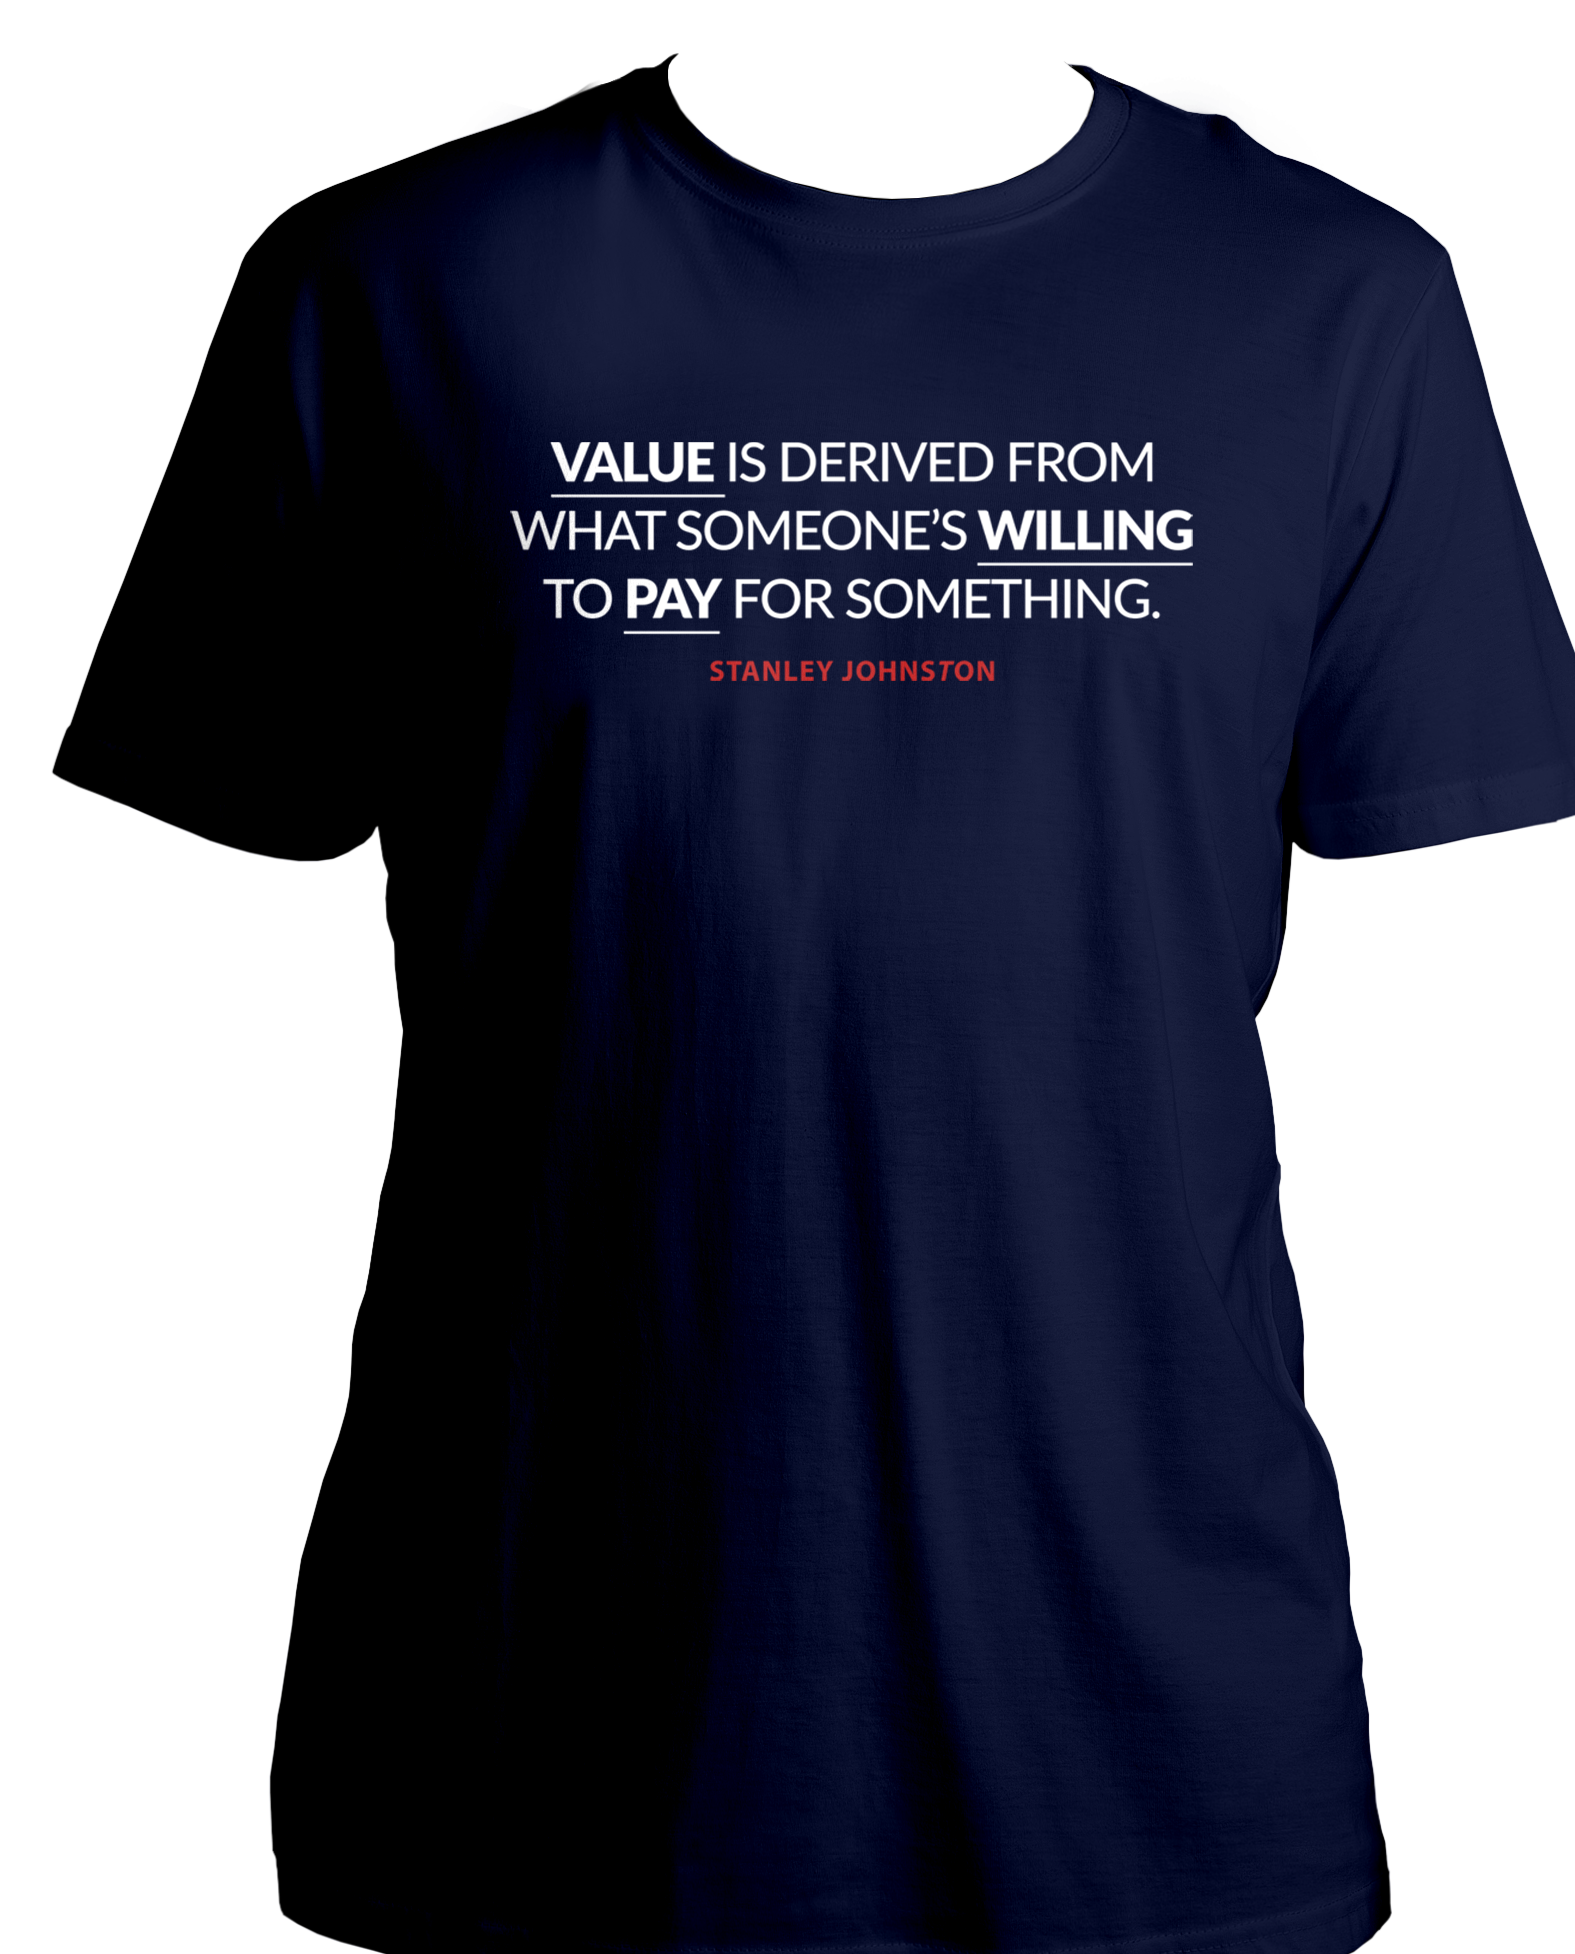 Featuring a fabulous quote from Stanley Johnston in the show – "Value is derived from what someone's willing to pay for something." – our t-shirts not only capture the essence of the series but also make a bold fashion statement.